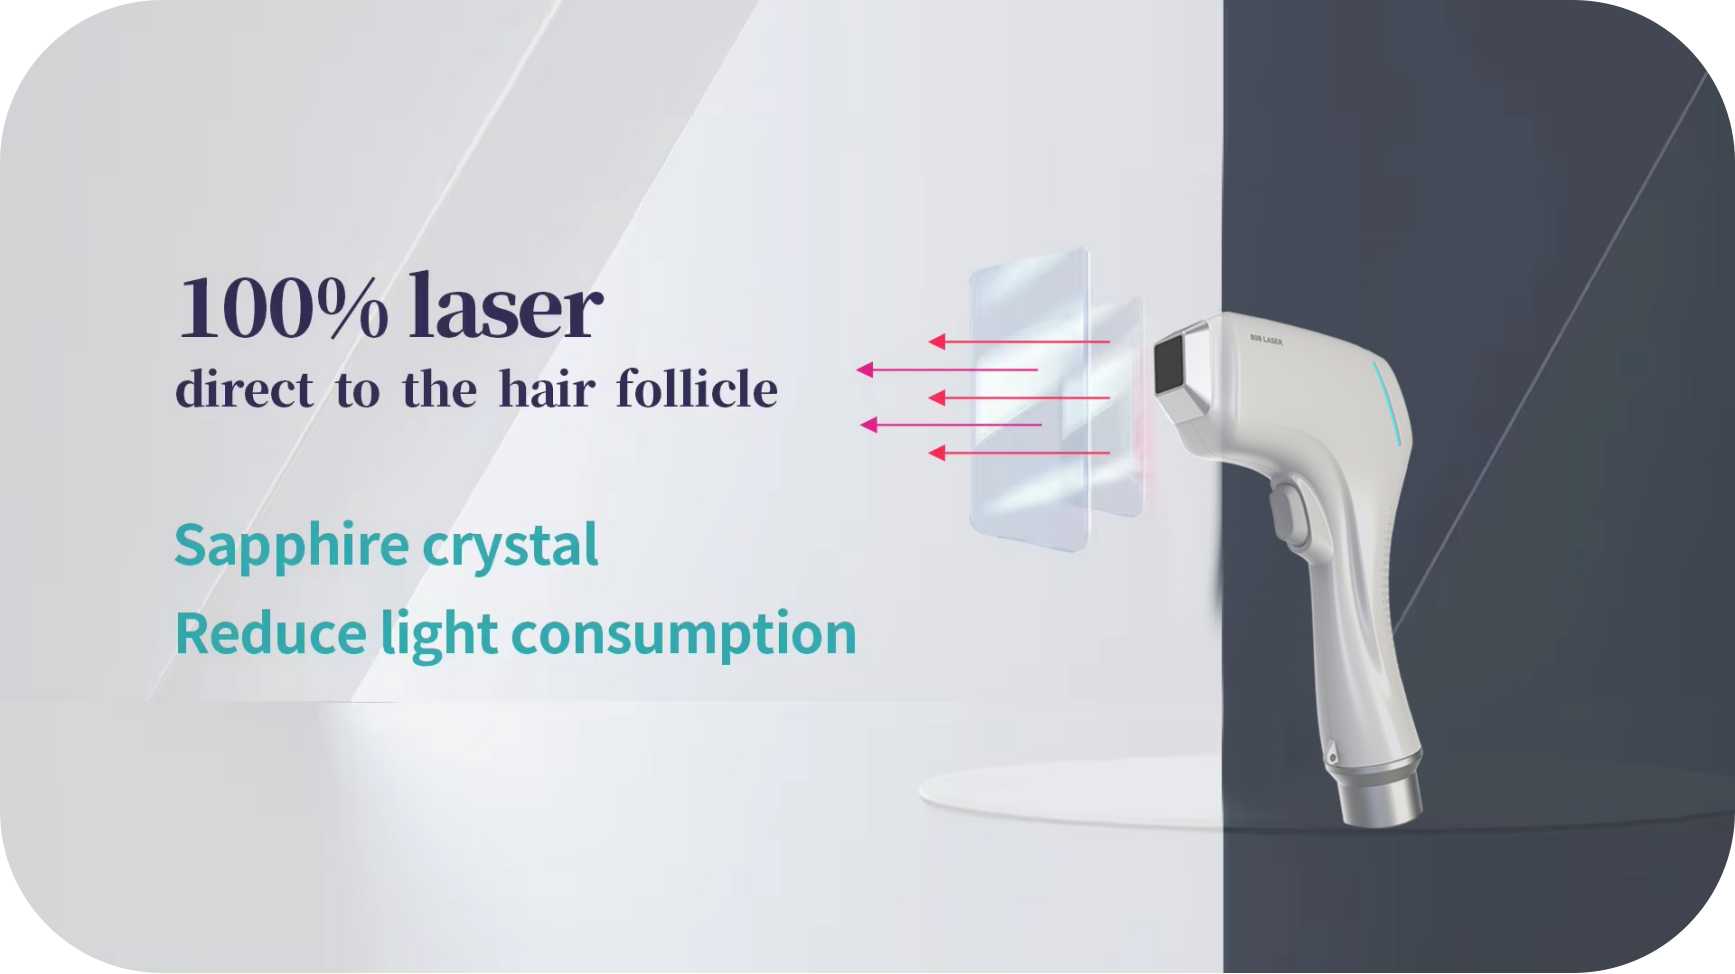 Introducing the Ultimate Laser Hair Removal System